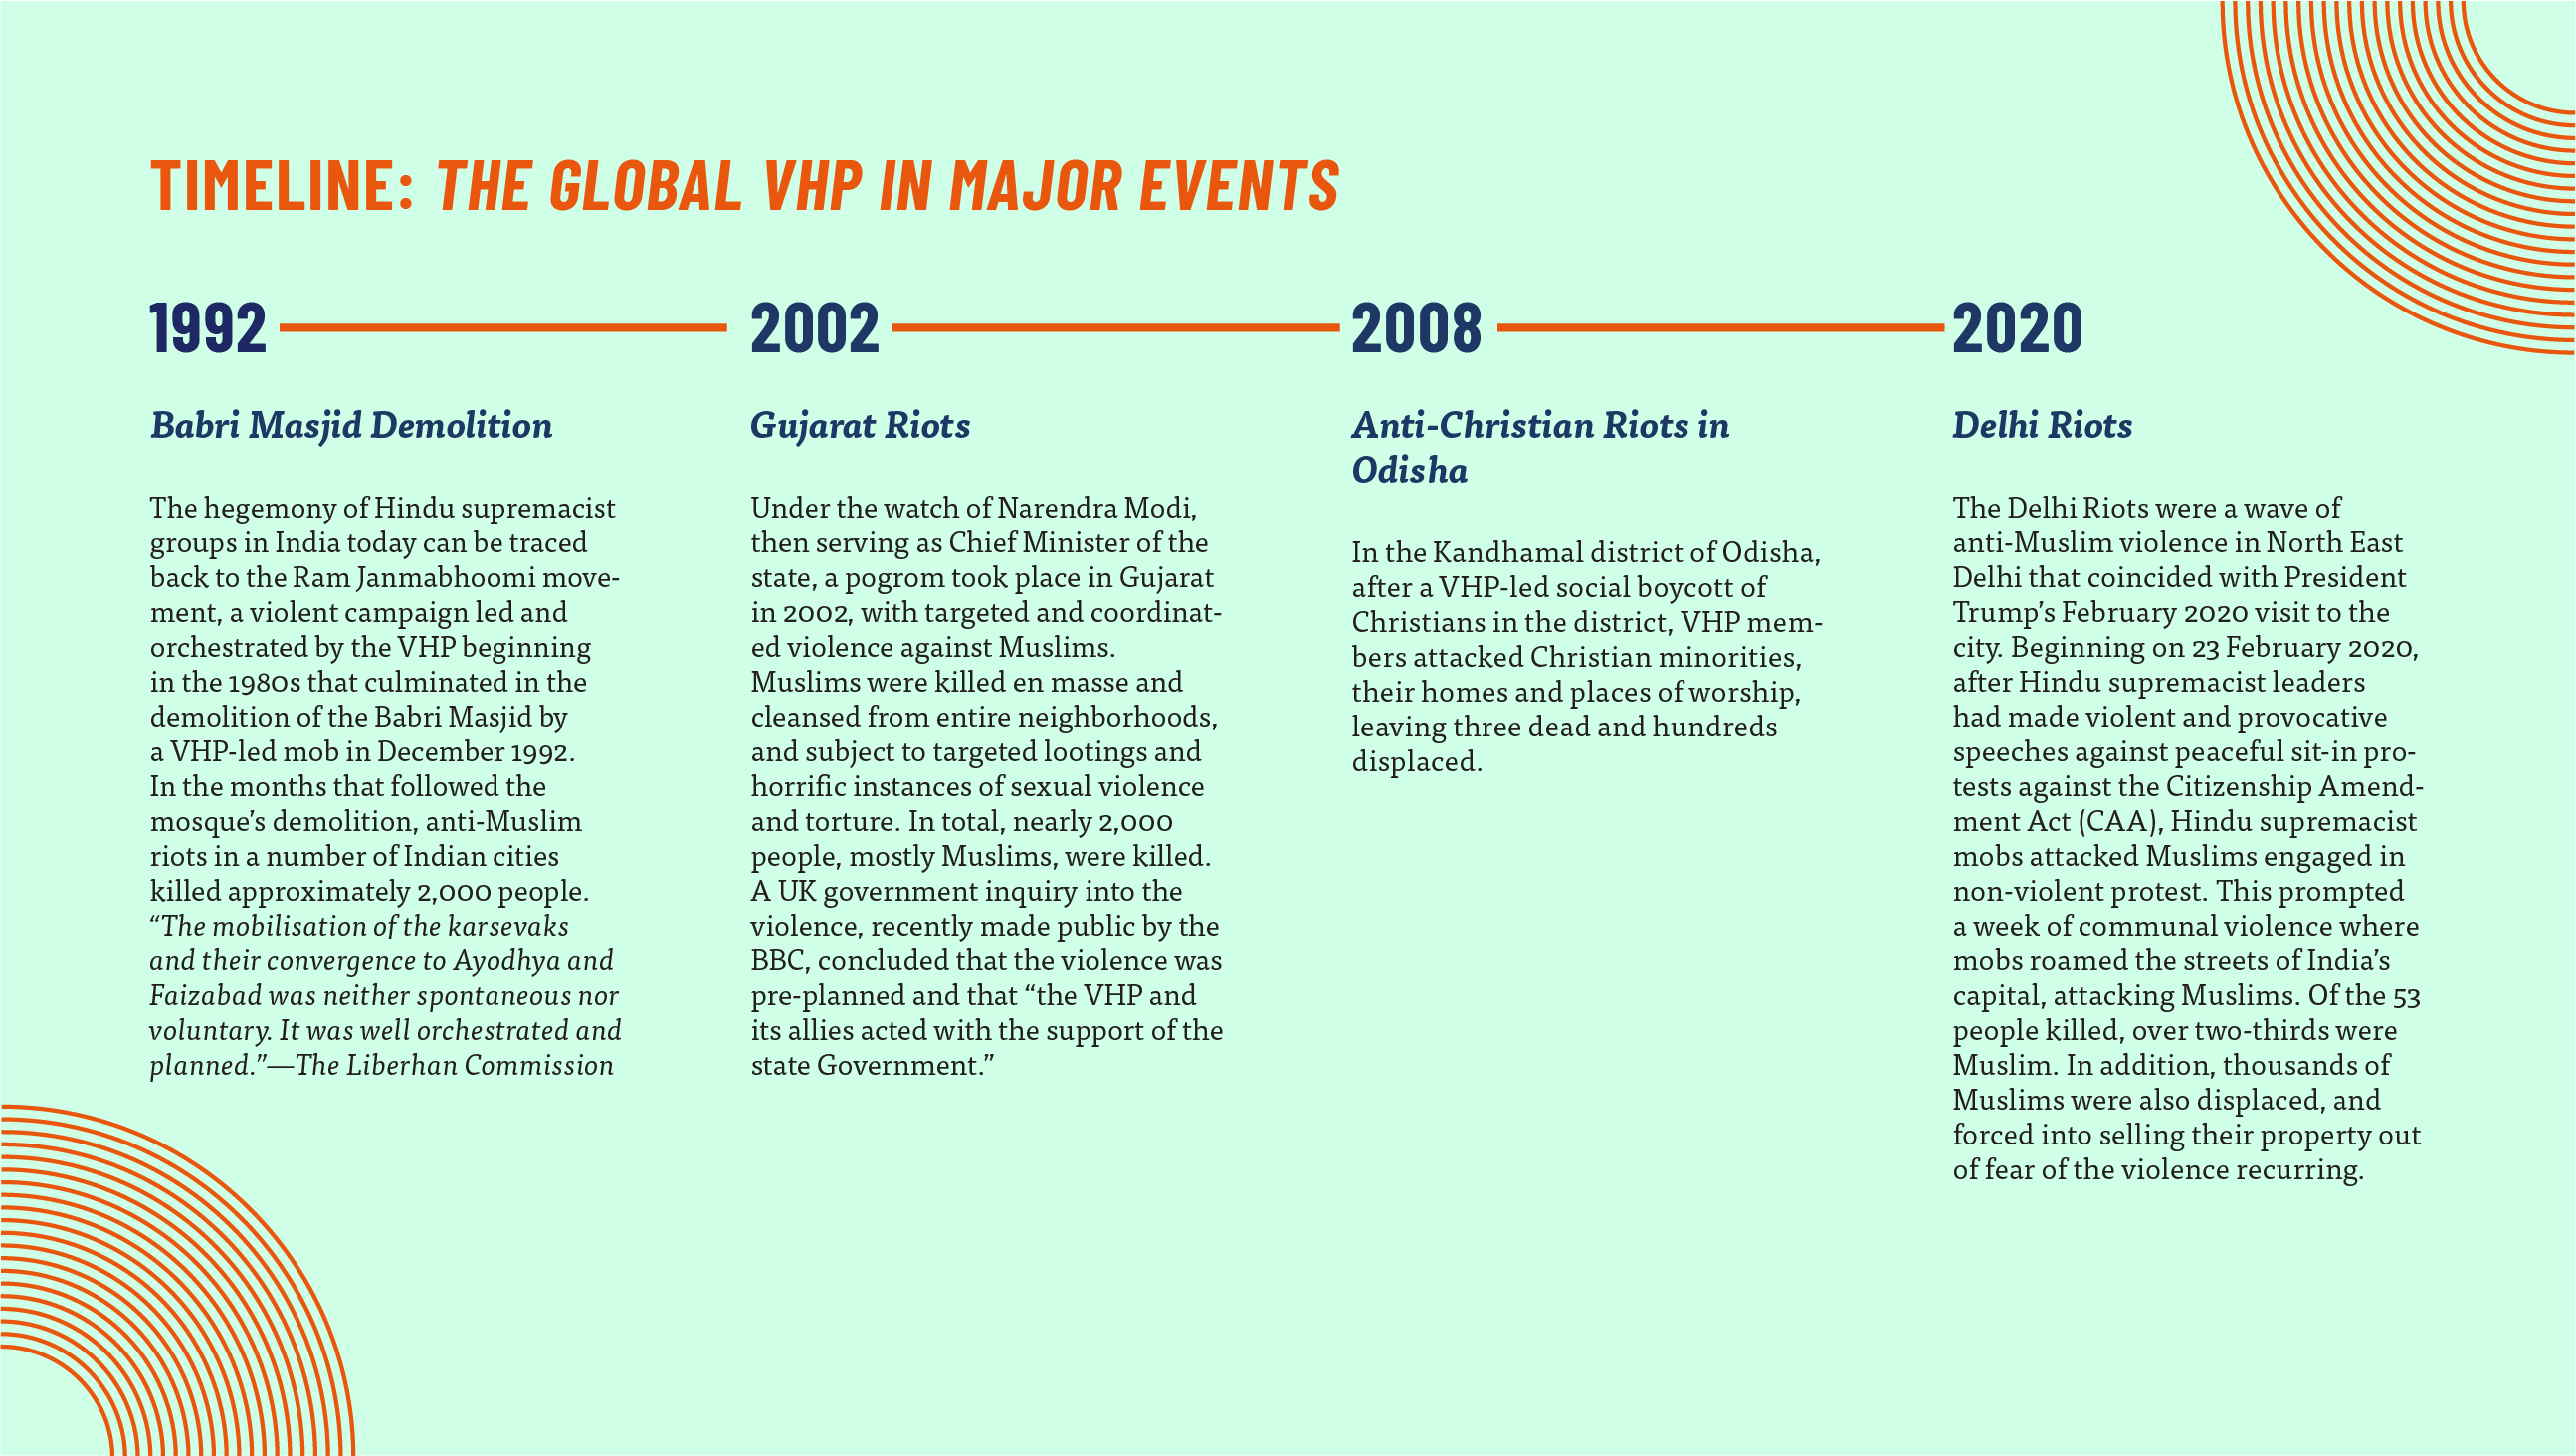 A timeline of major events. Text can be found below the image.